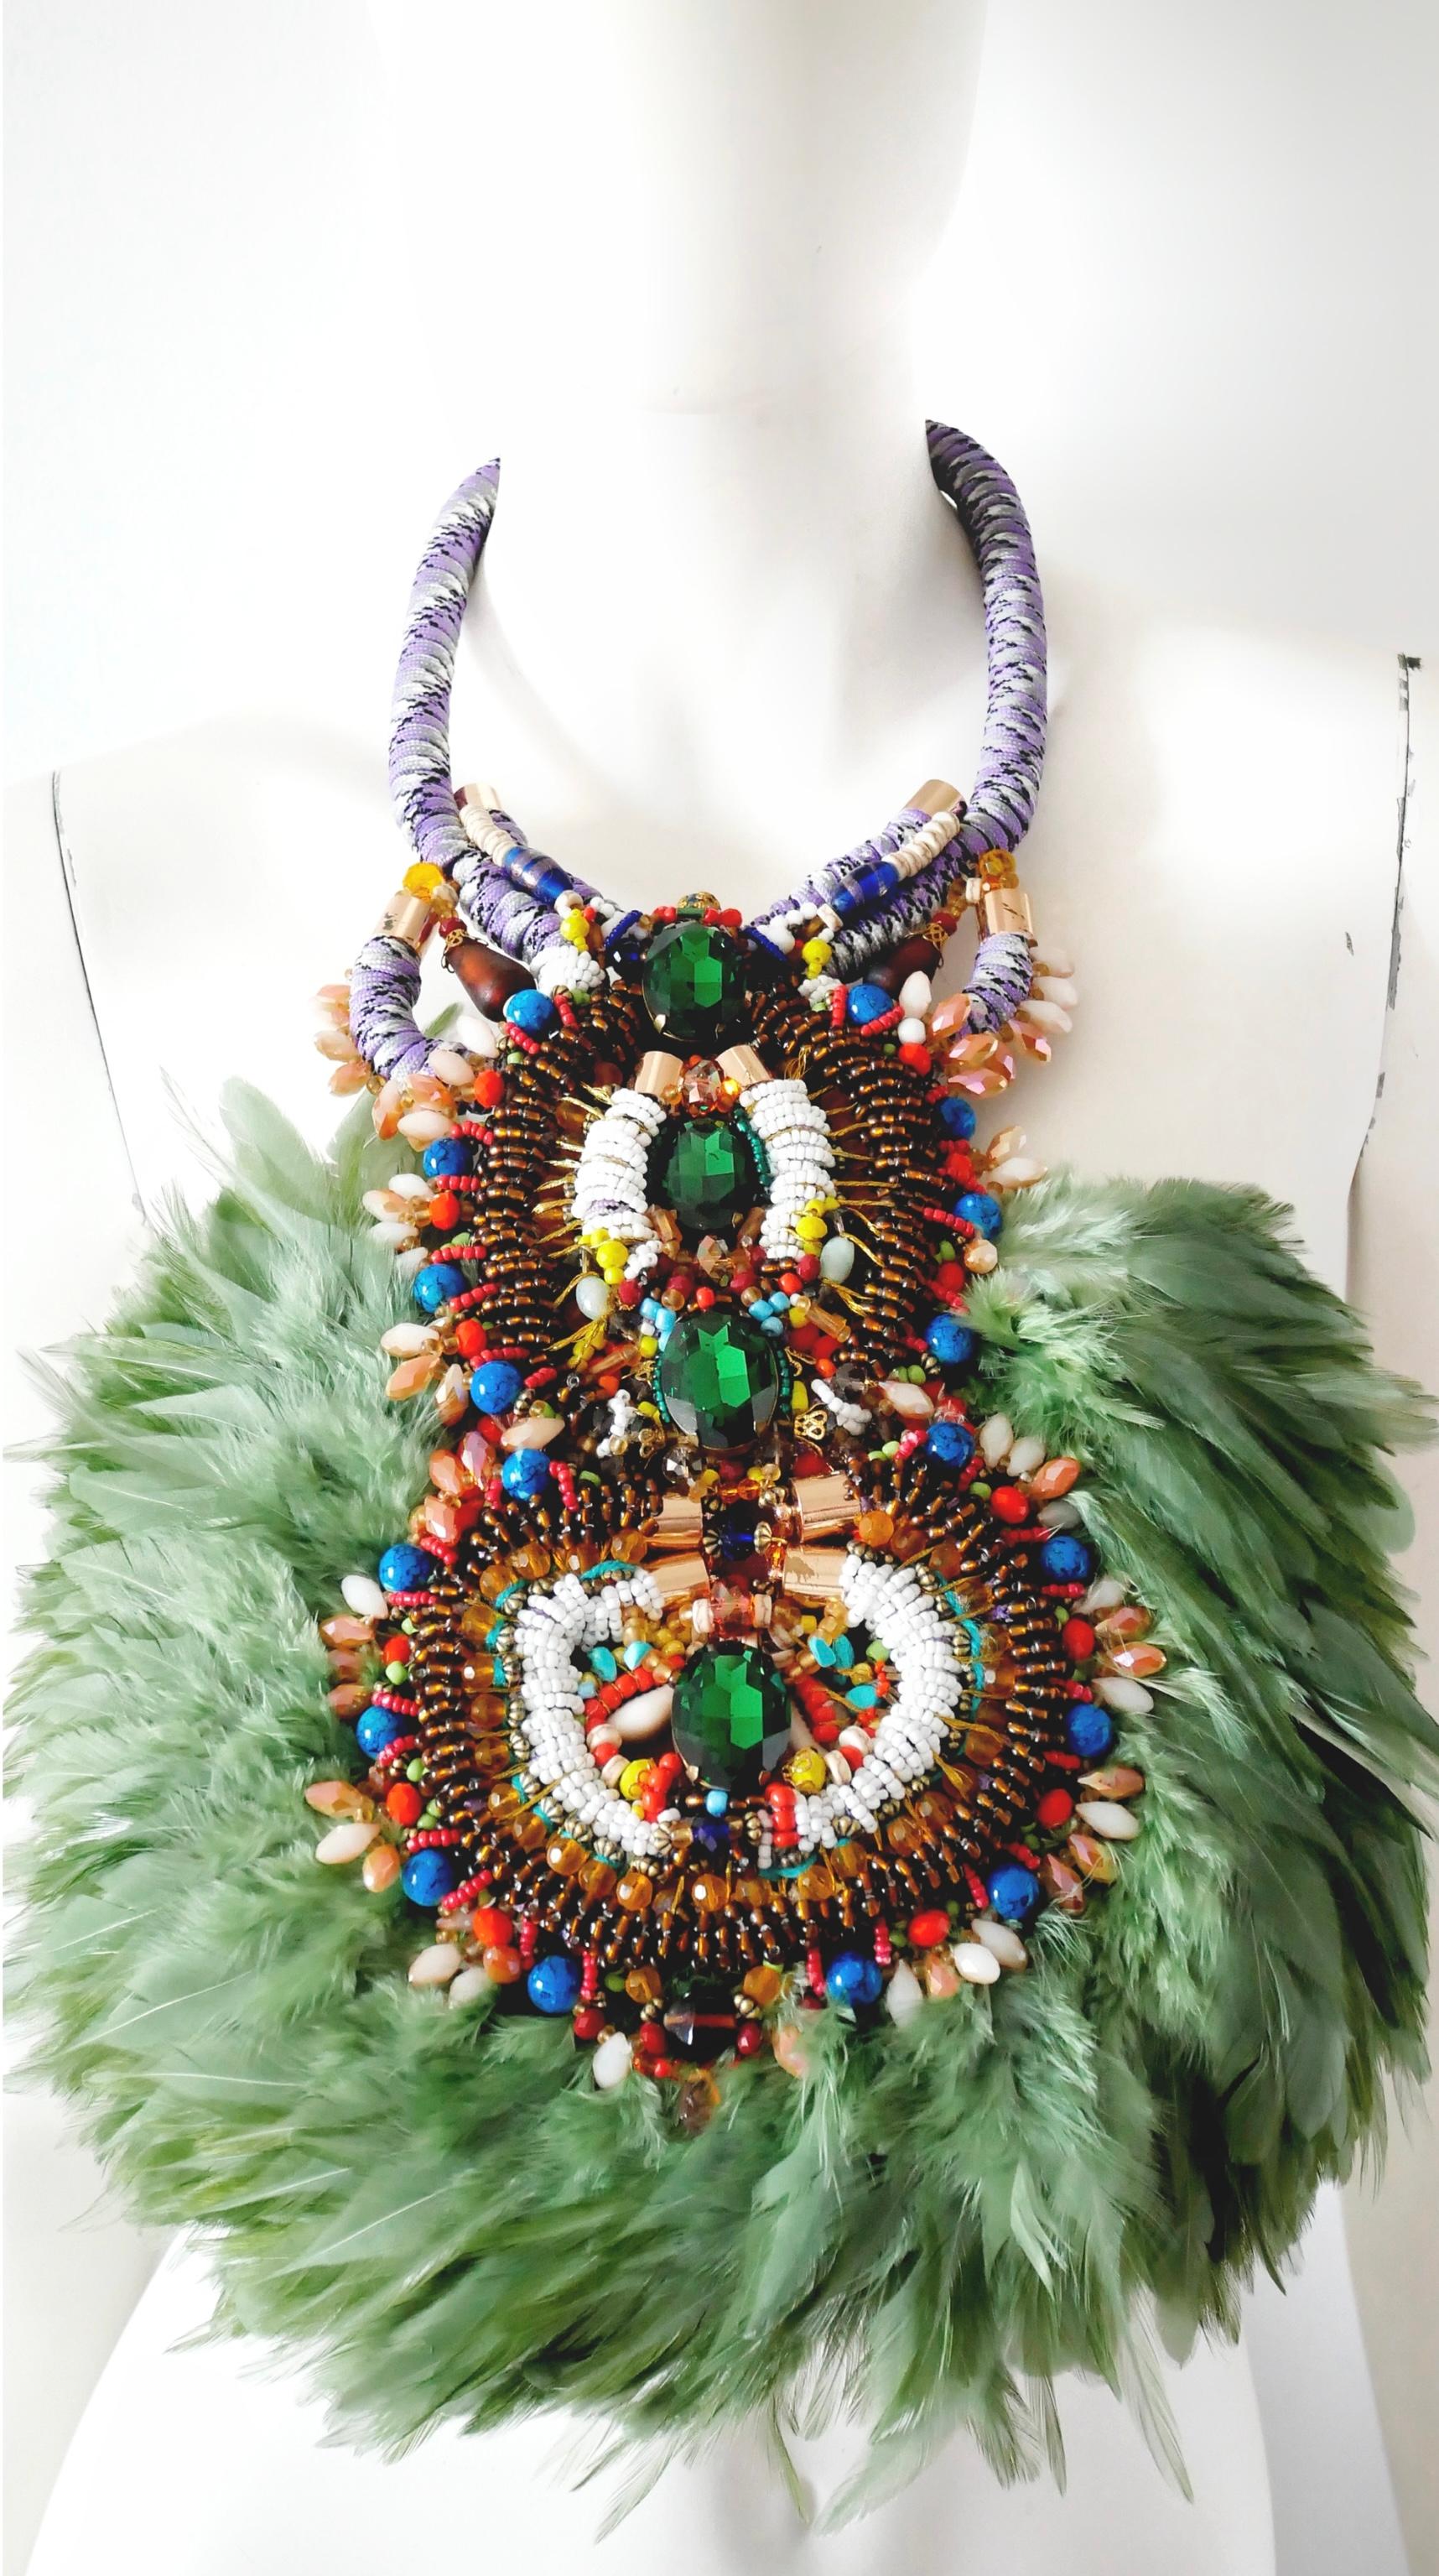 A magnificent blend of drama and luxury, this Multi-Coloured Glass Beaded and  Swarovski Crystal Feather Pendant Bib Necklace stands apart in its design. An eye-catching array of glass beads in a range of colours, shapes and sizes is complemented by